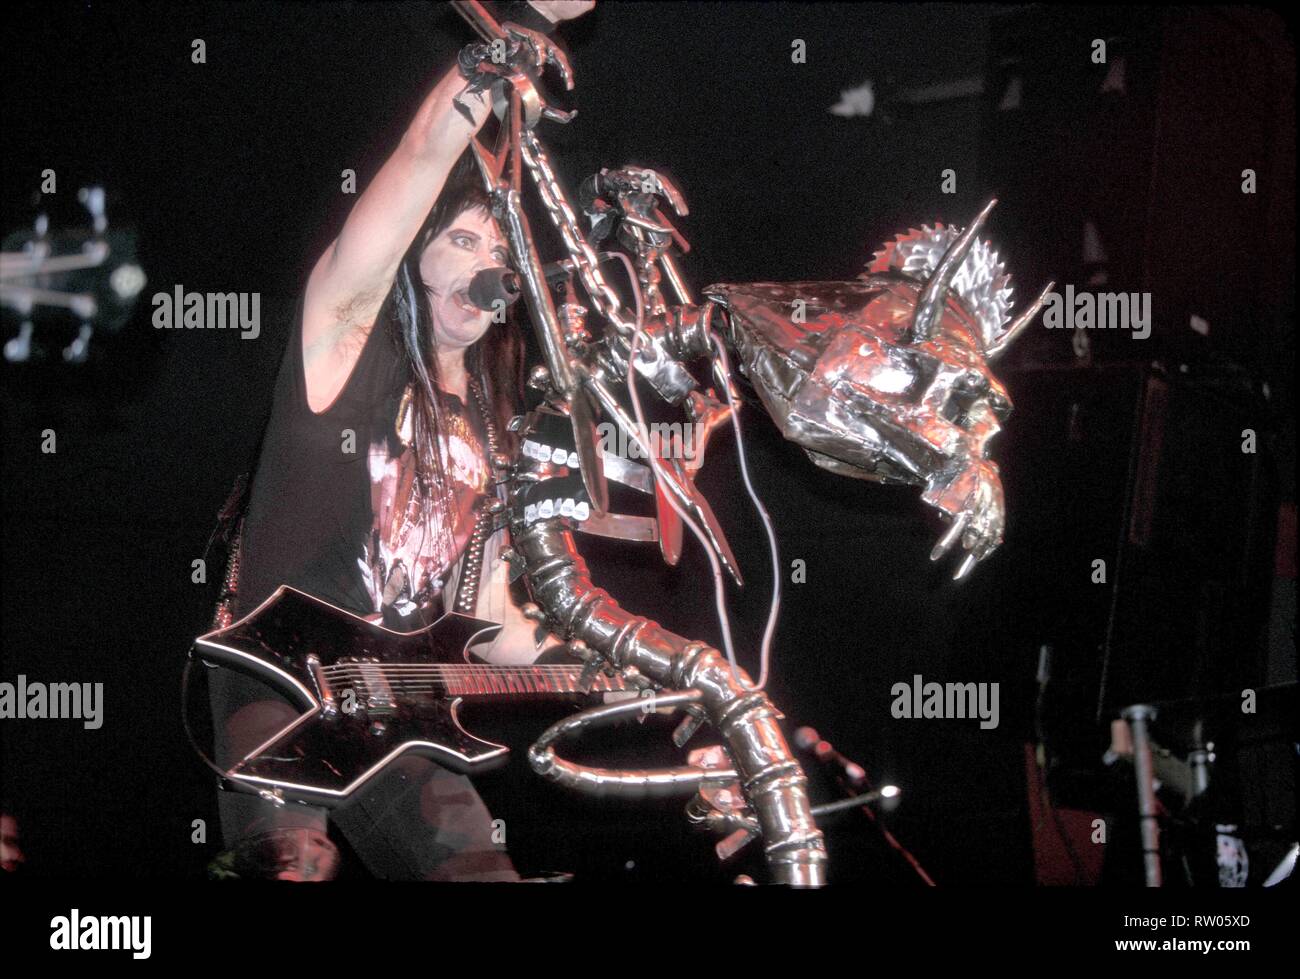 Singer, songwriter and guitarist Blackie Lawless of the heavy metal band W.A.S.P. is shown performing on stage during a 'live' concert appearance. Stock Photo